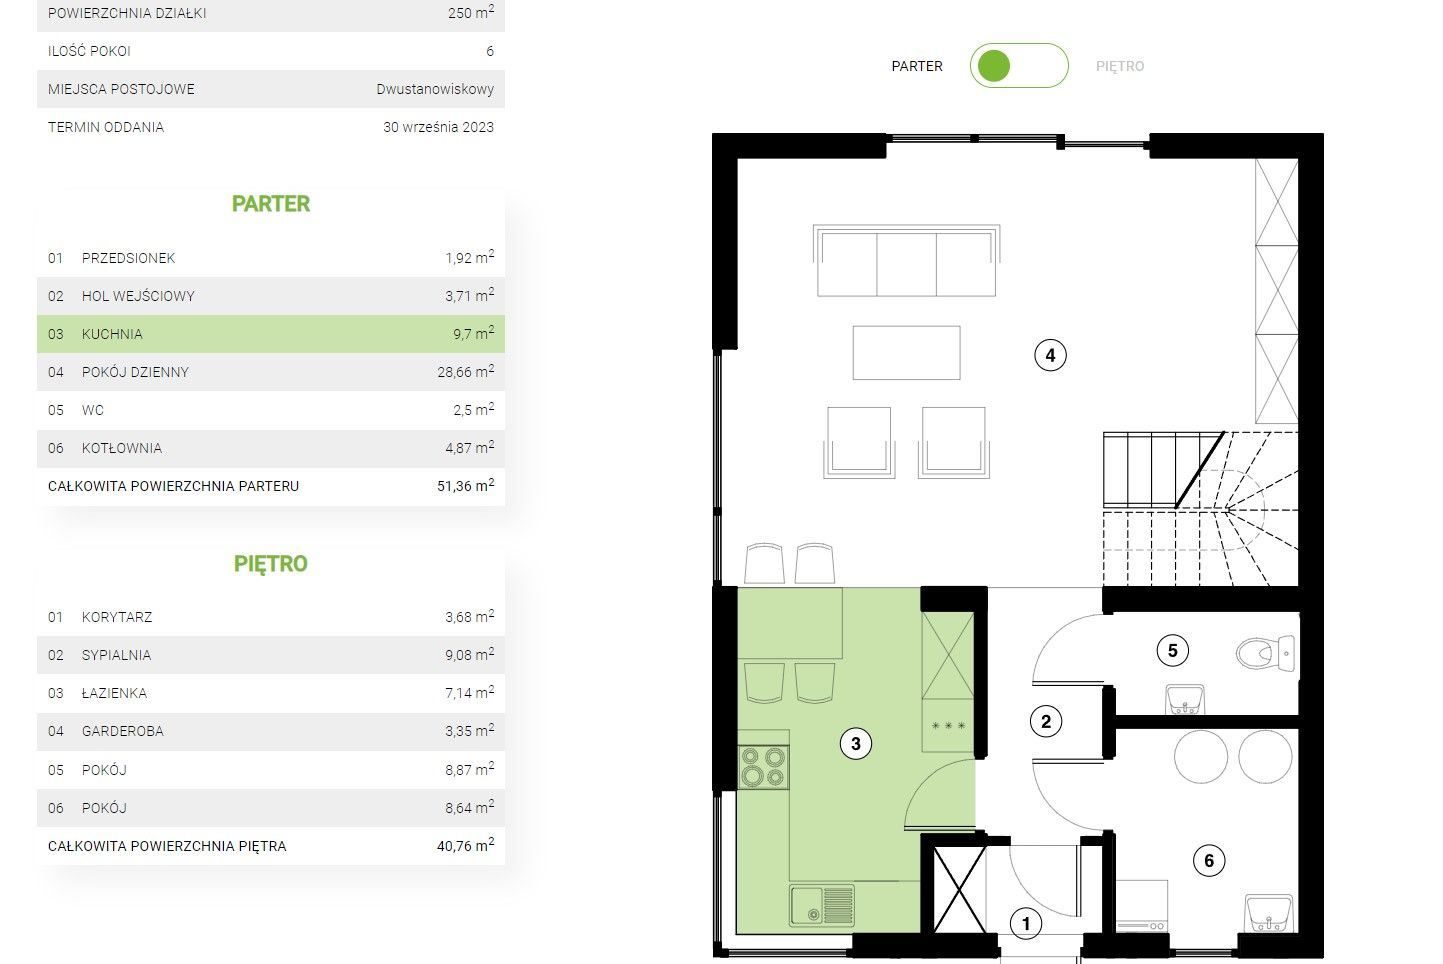 interactive-view-of-apartments-on-the-investment-page-4.jpg